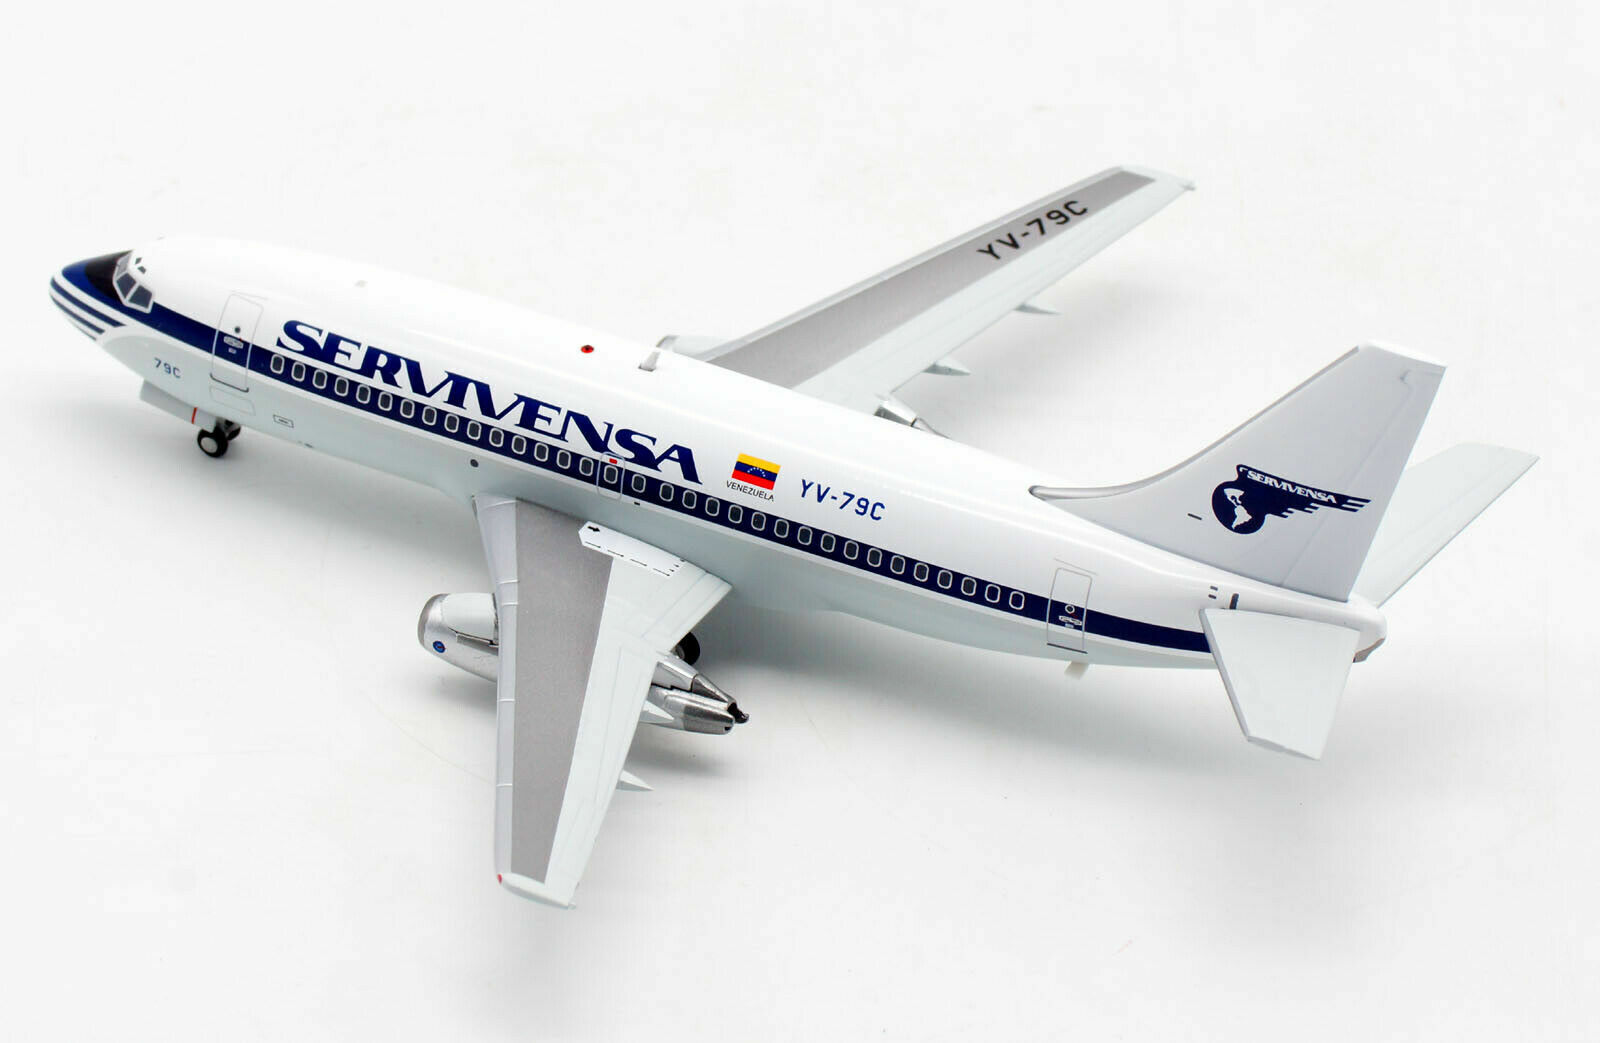 1:200 IF200 Servivensa 737-200 YV-79C with stand